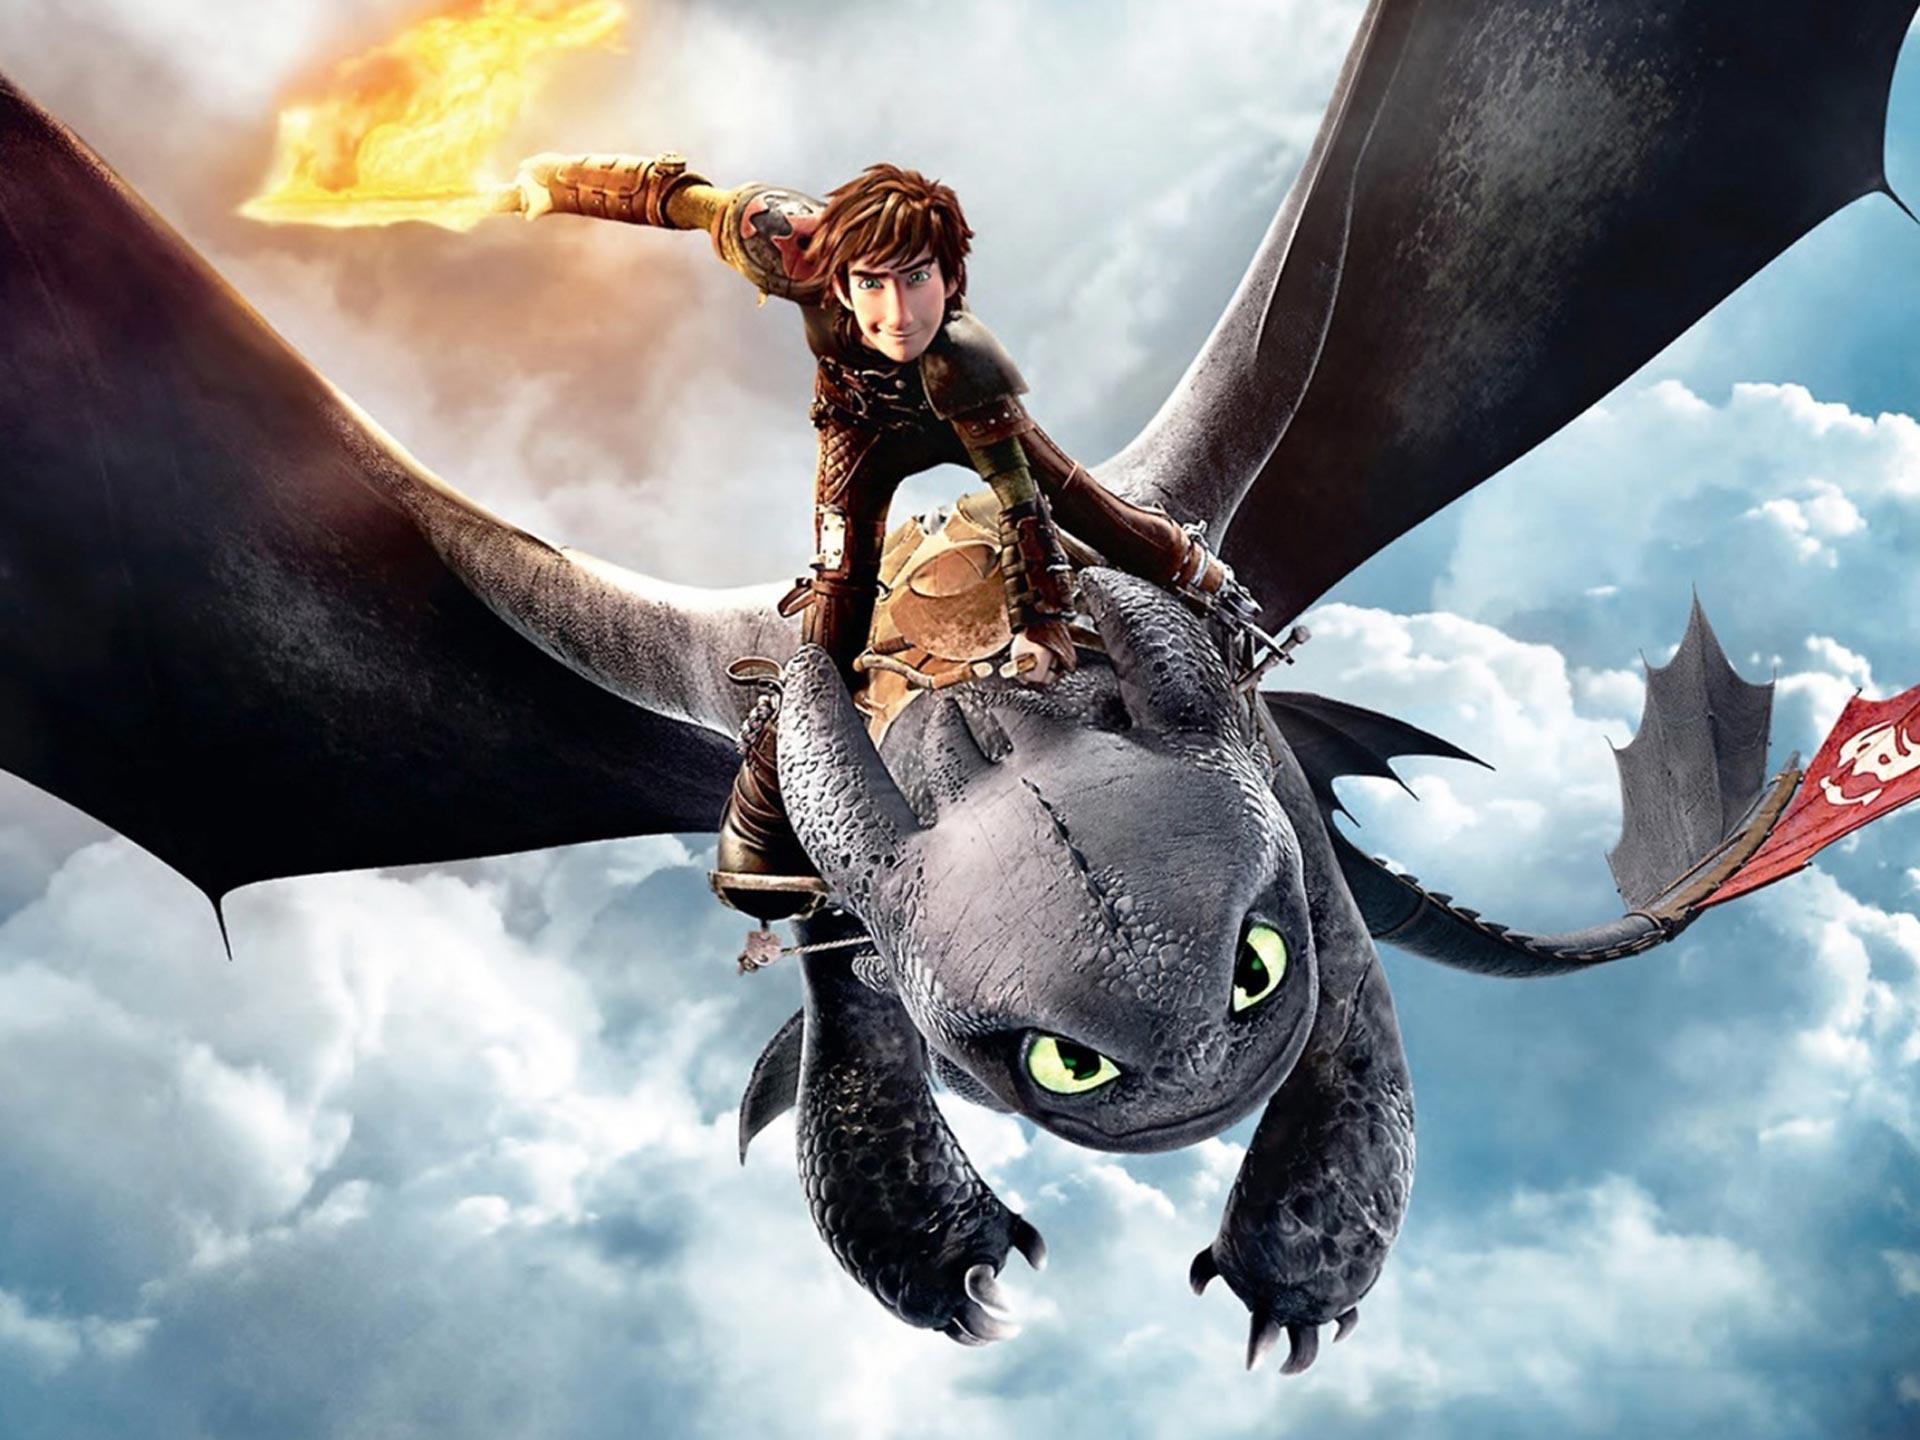 1920x1440 100% HDQ How To Train Your Dragon Wallpapers | Desktop 4K High .